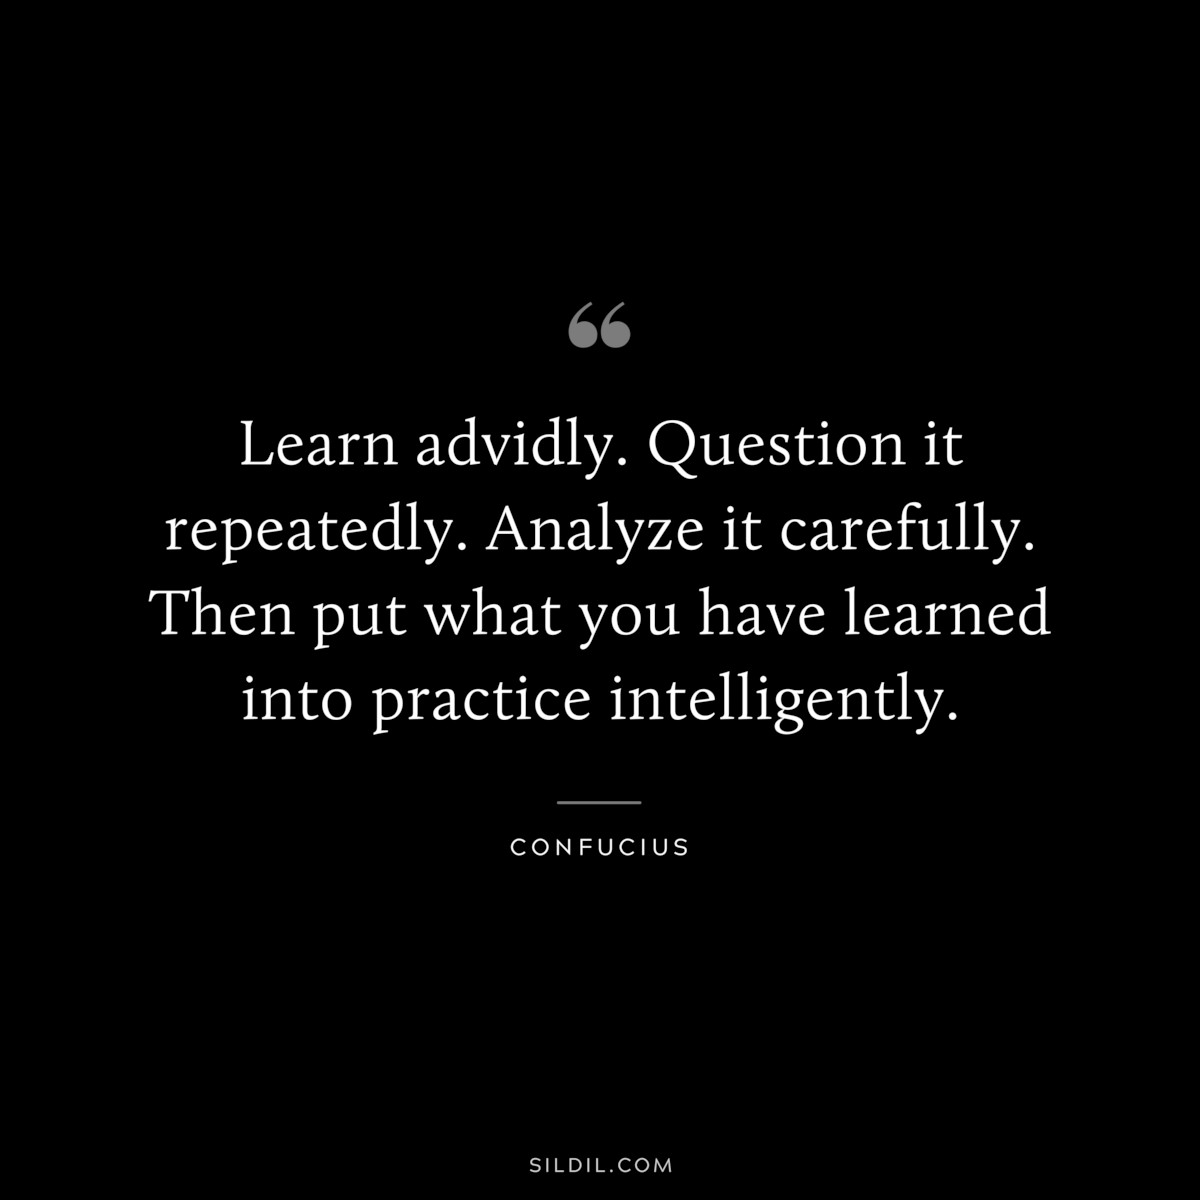 Learn advidly. Question it repeatedly. Analyze it carefully. Then put what you have learned into practice intelligently. ― Confucius